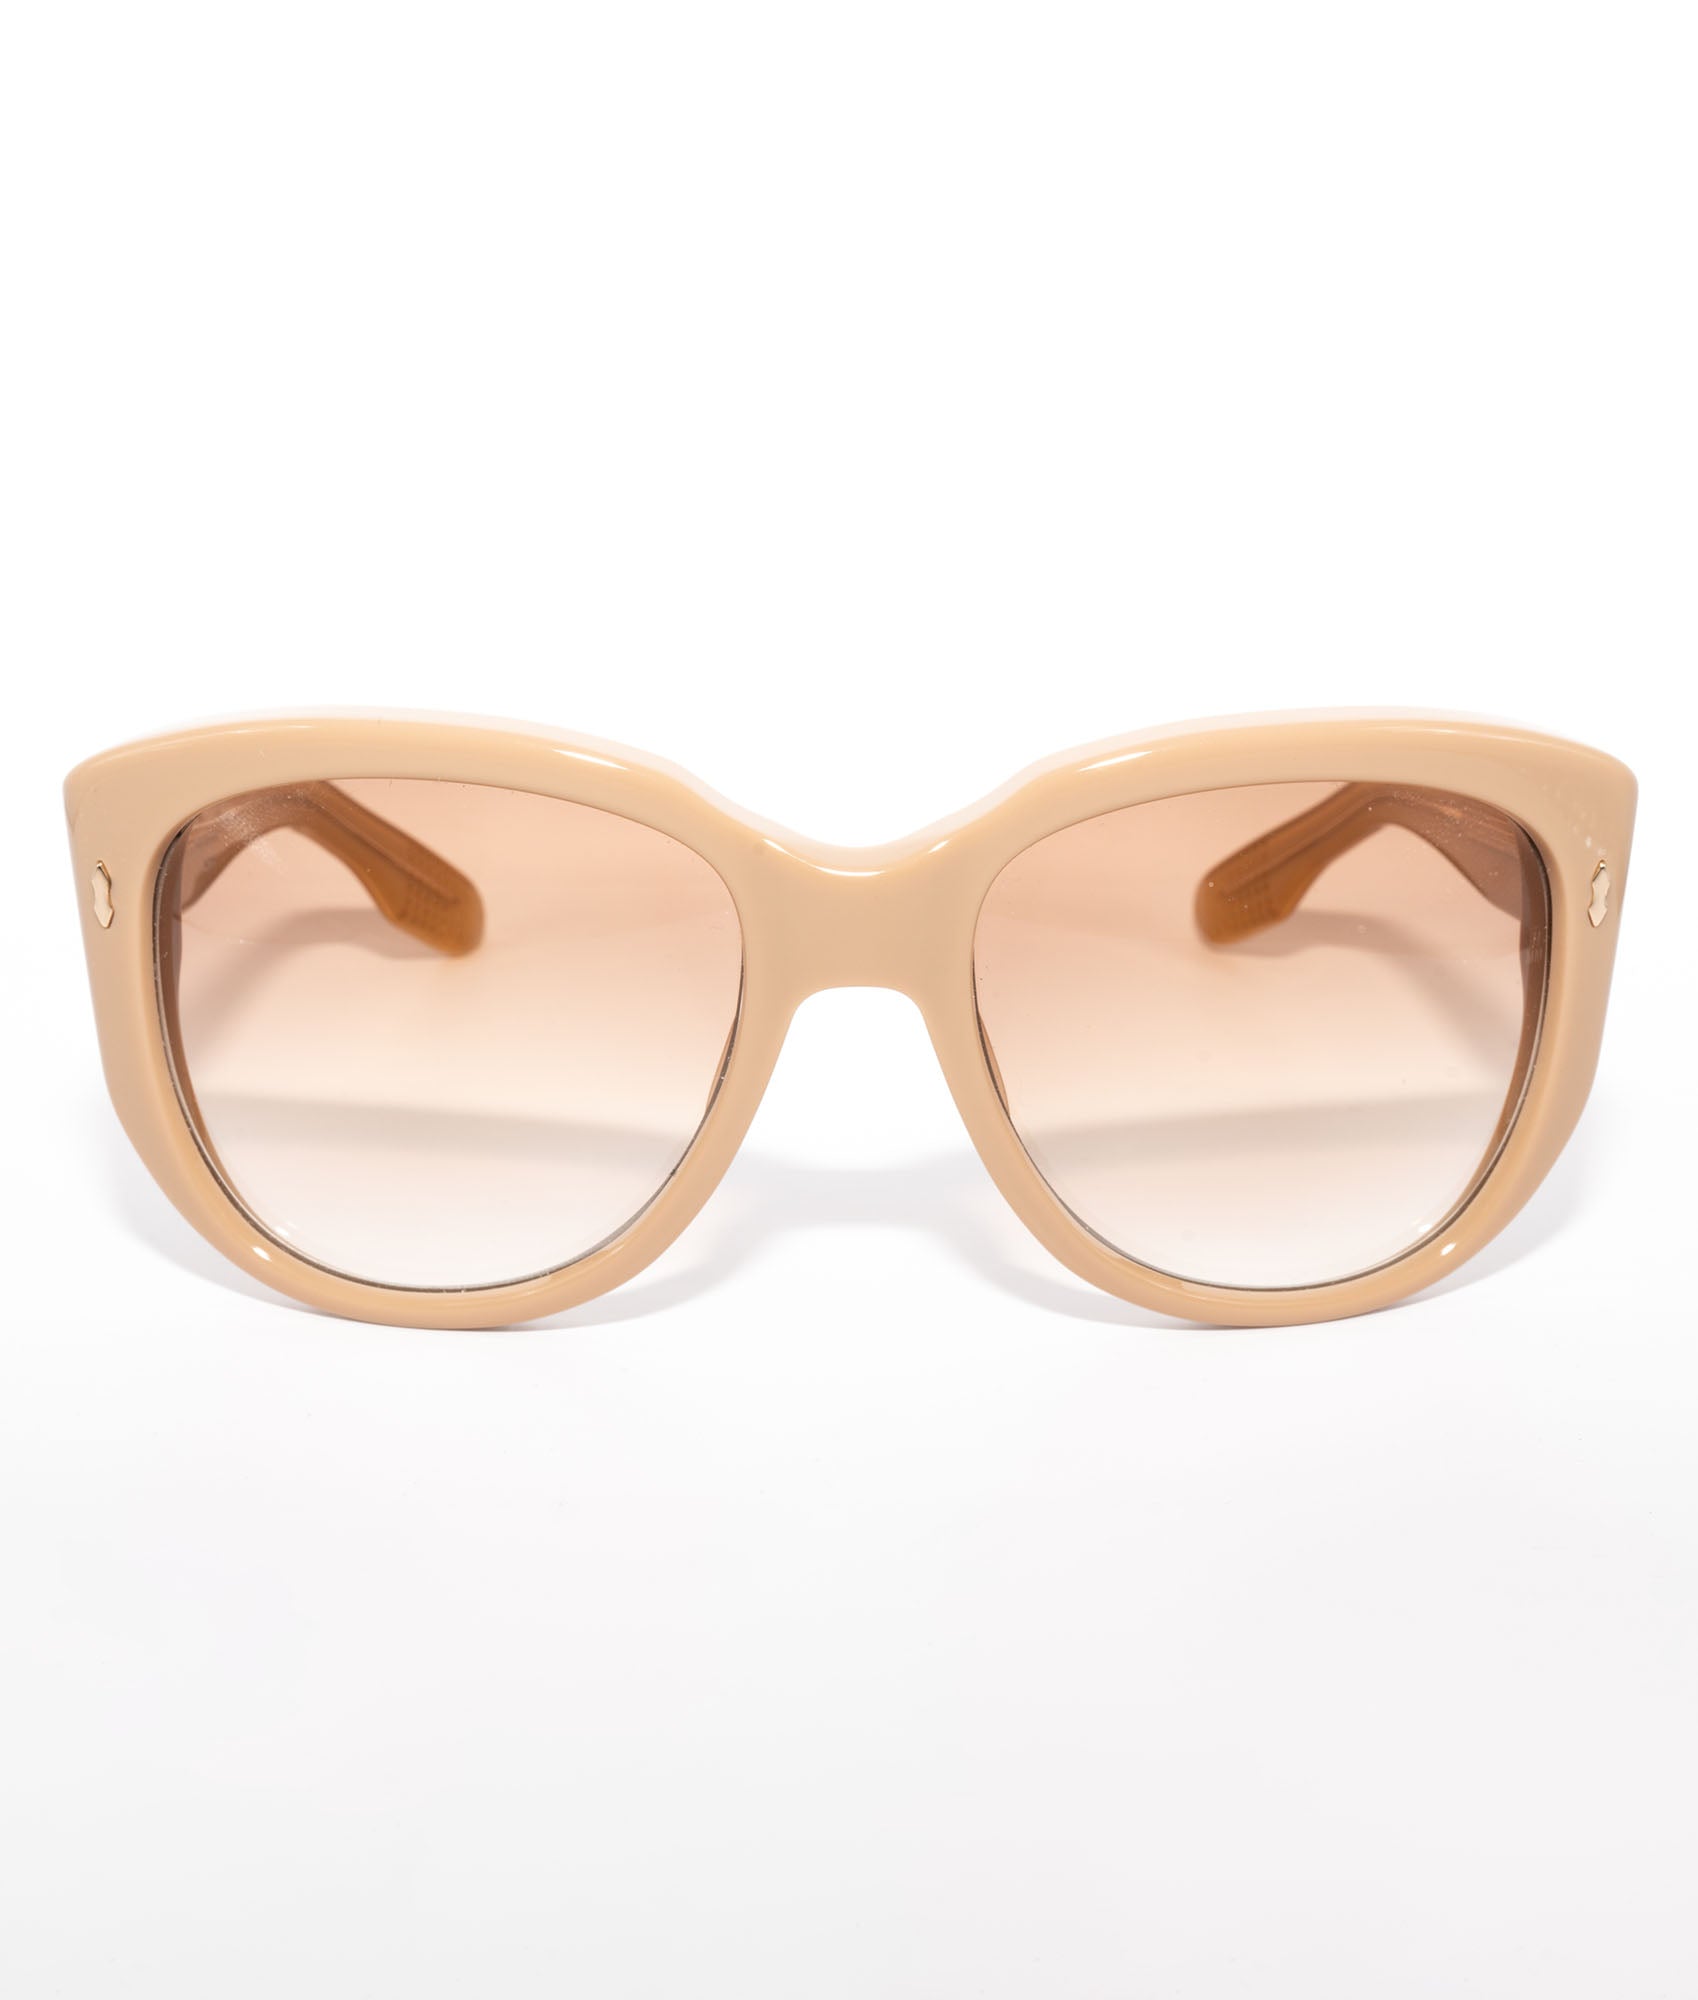 Jacques Marie Mage | ROXY – SAND/TAN LIGHT GOLD